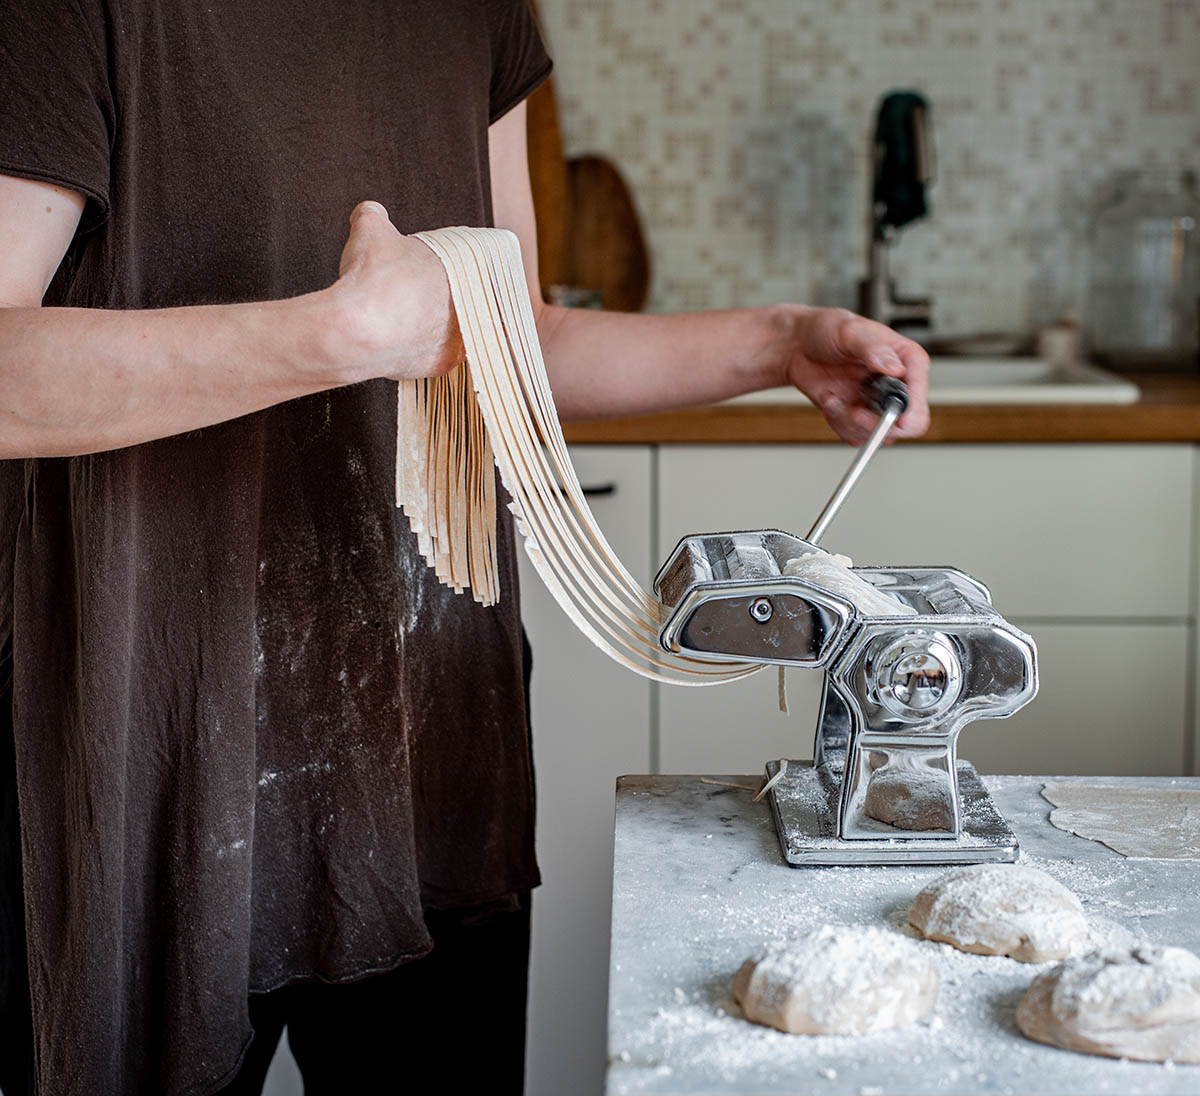 Woman lifting cut fettuccine from a pasta maker.